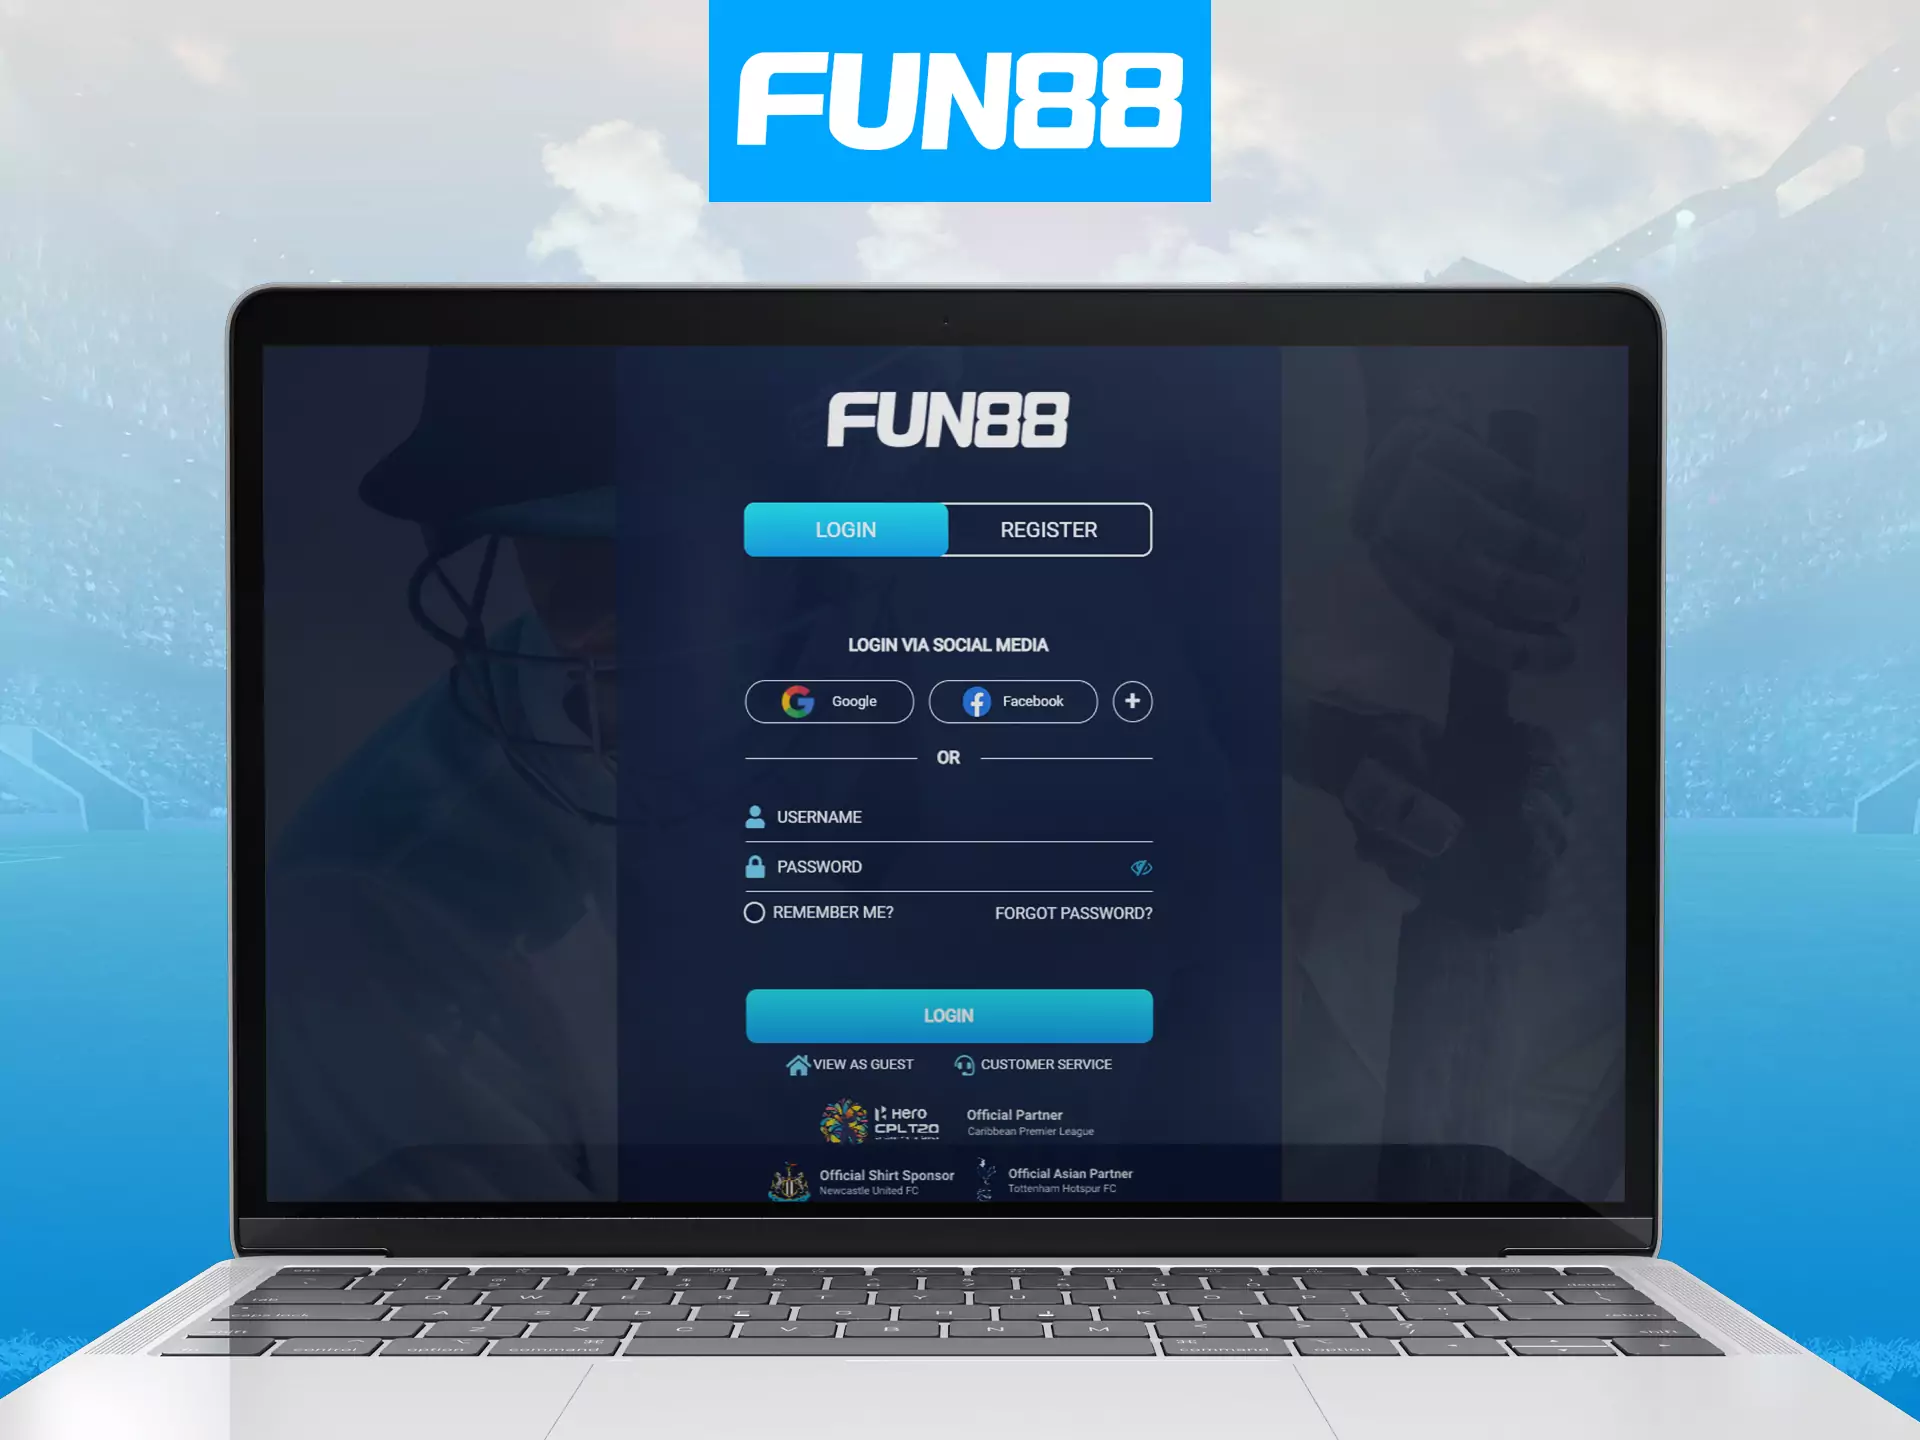 At Fun88, login to your account to take full advantage.